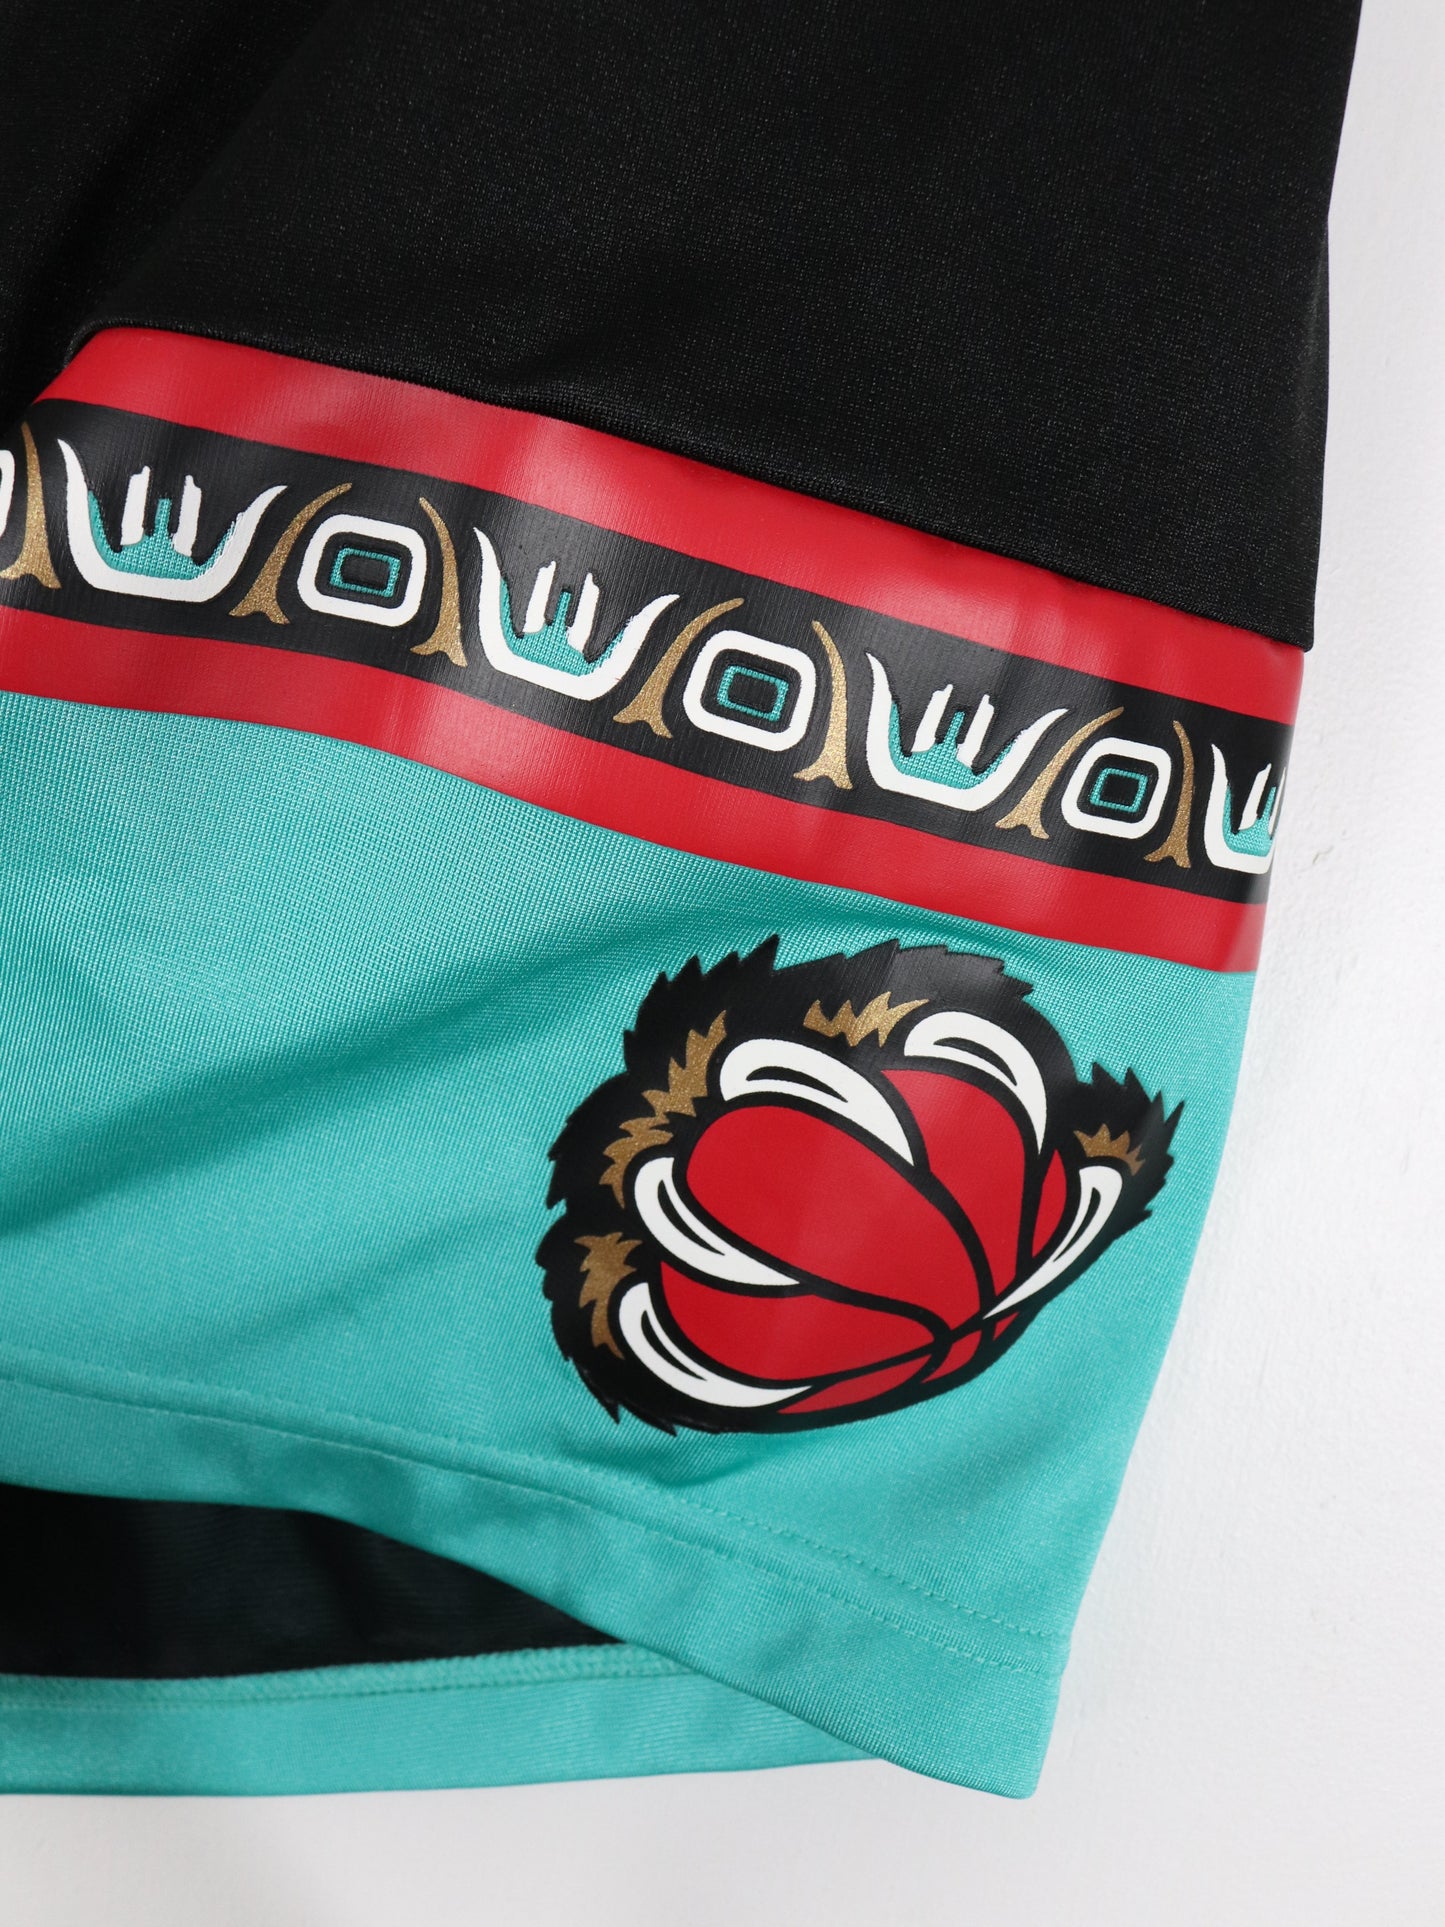 Vancouver Grizzlies Shorts Mens Large Black Mitchell & Ness NBA